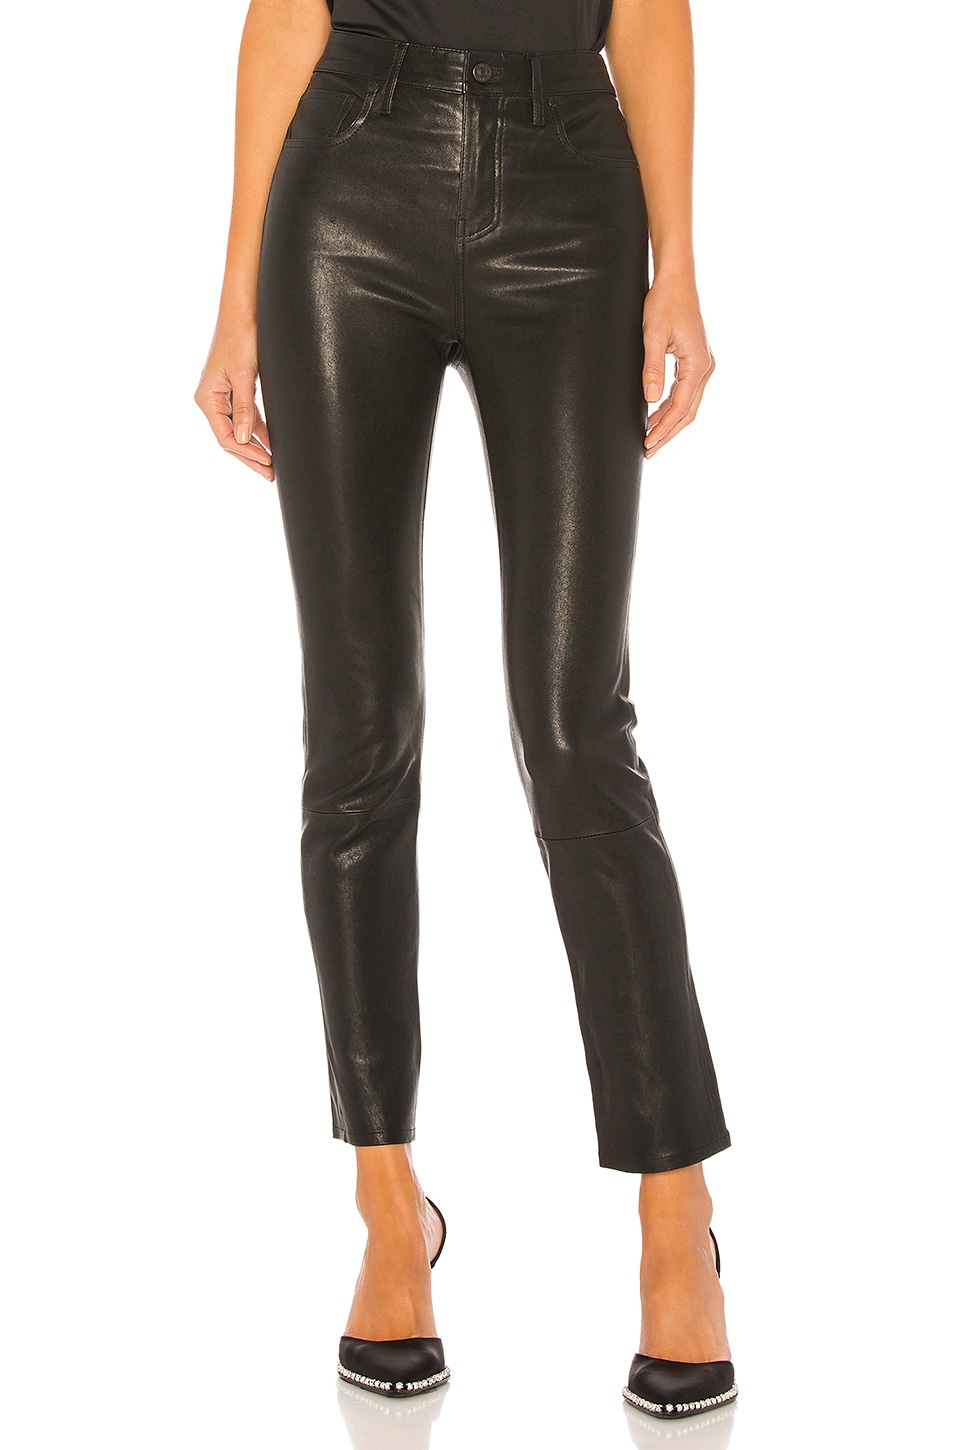 Citizens of Humanity Harlow Leather Ankle Pant in Black | REVOLVE